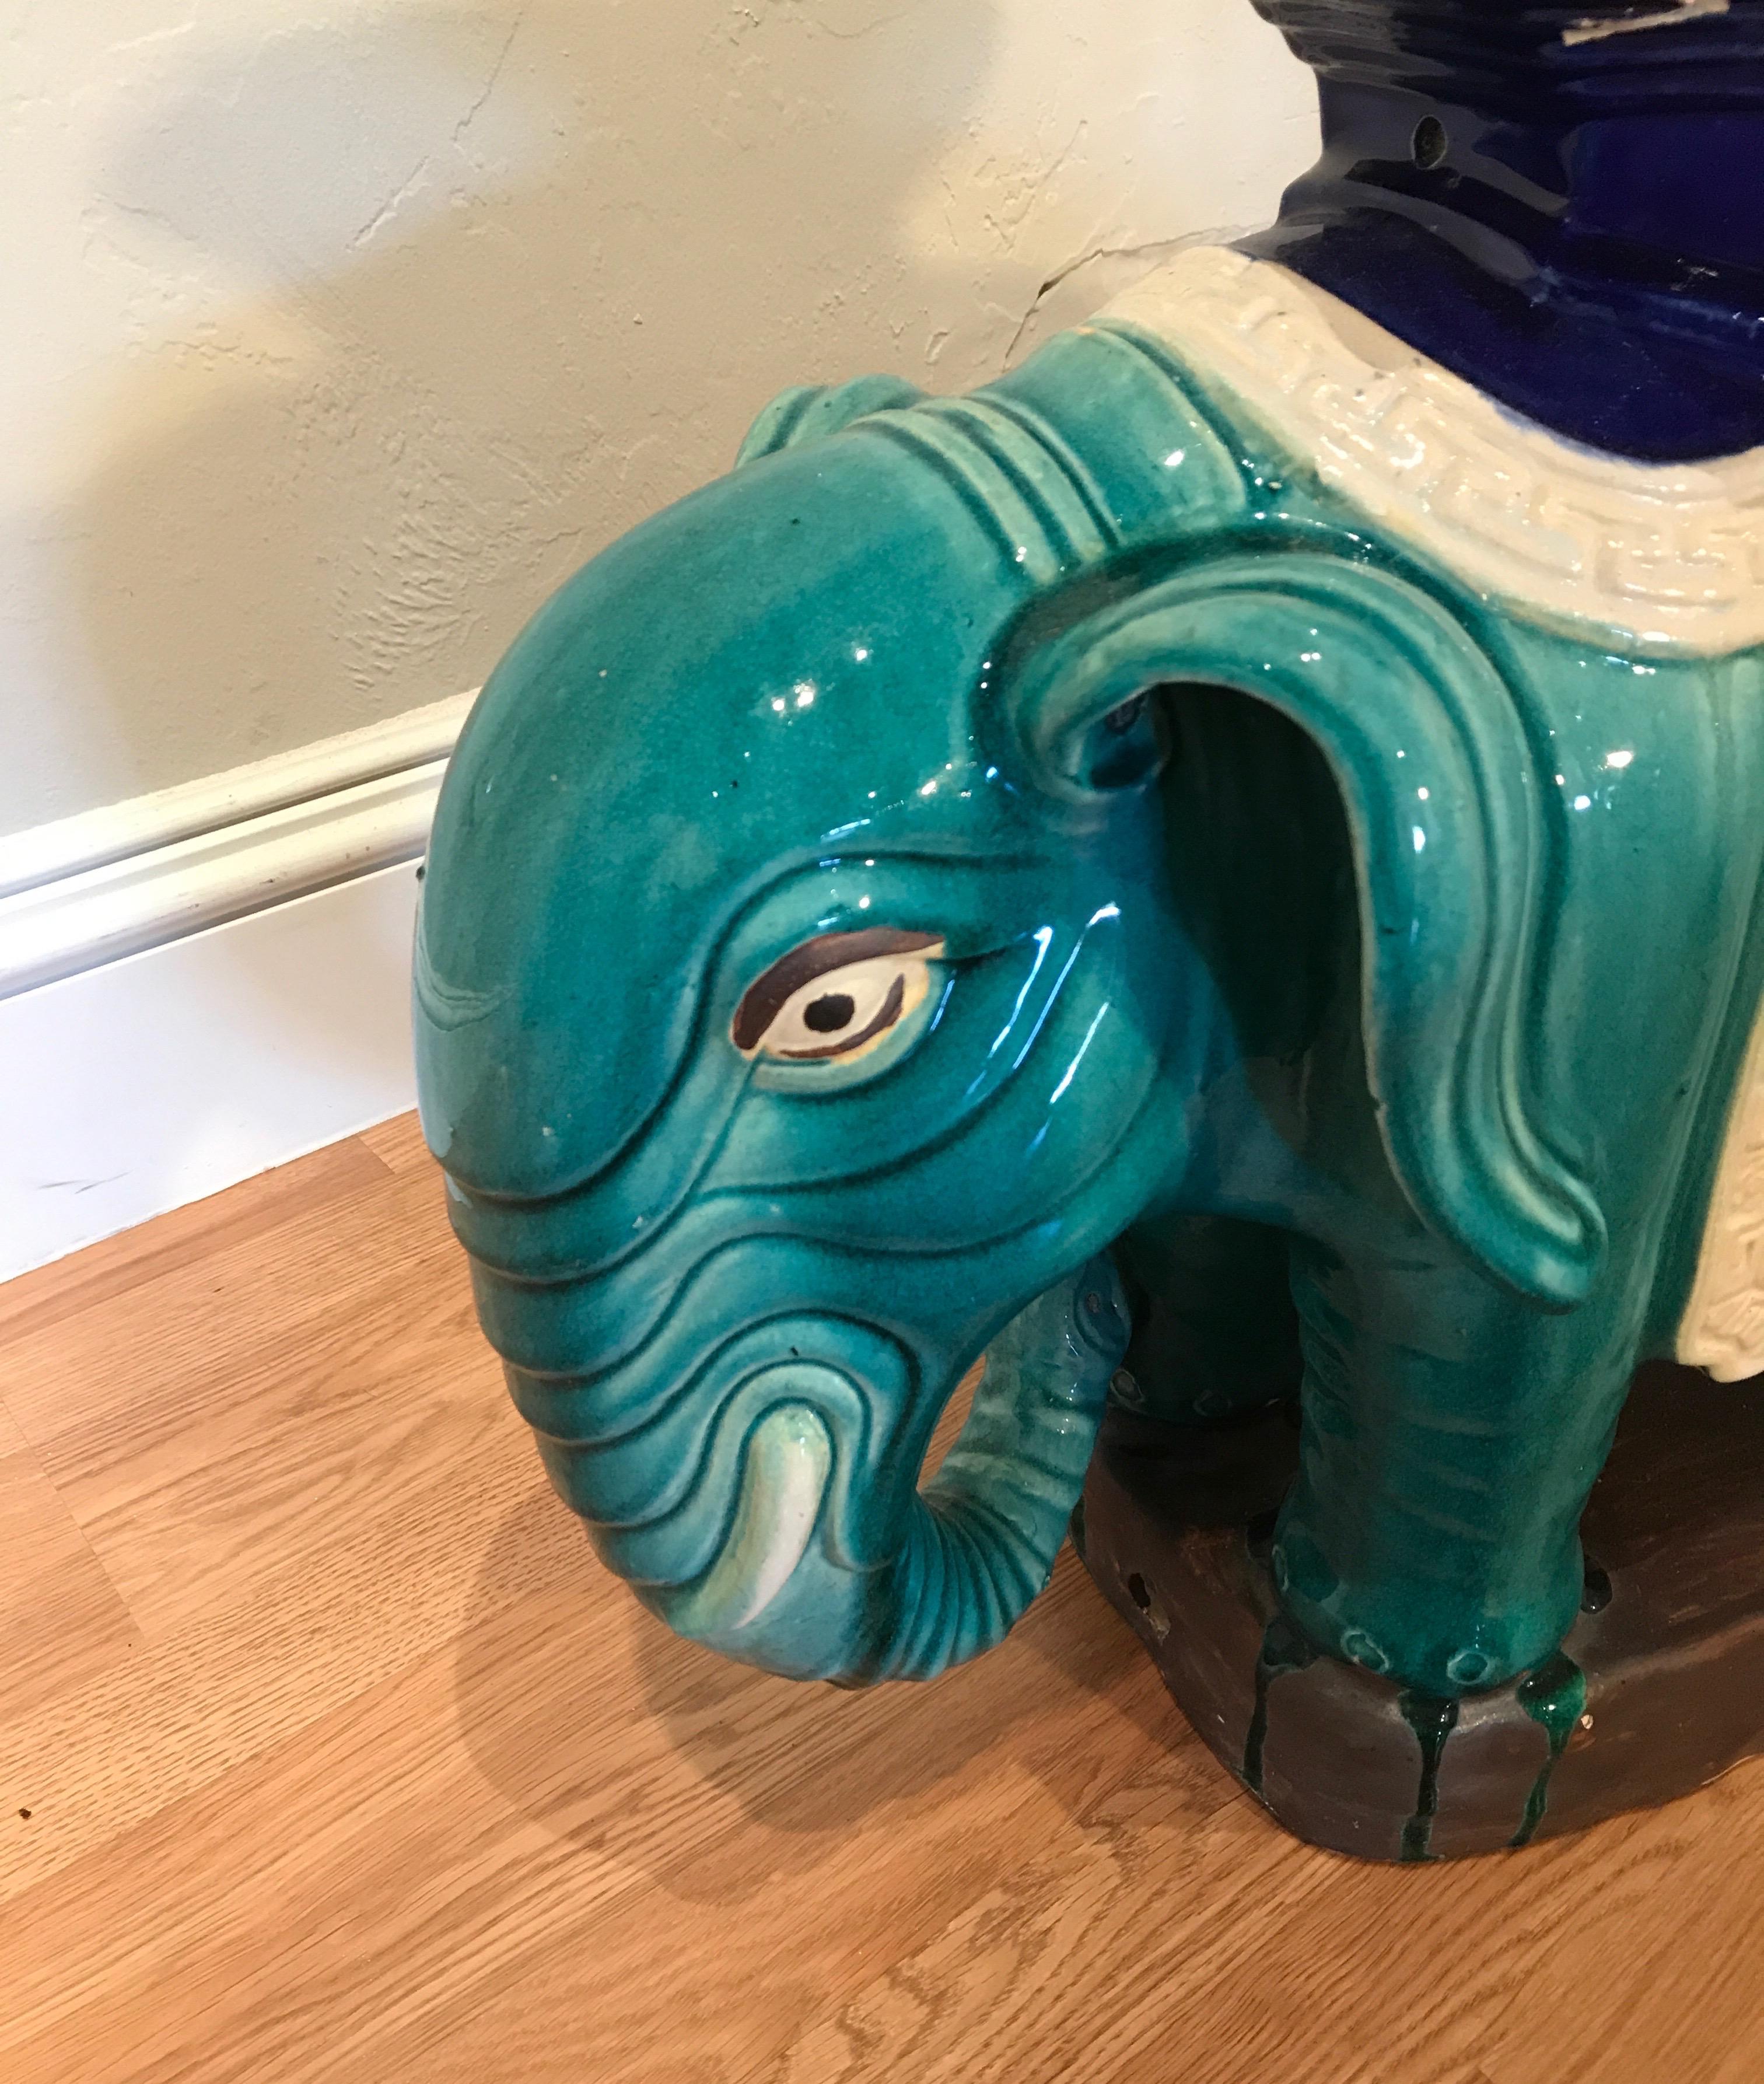 Charming glazed terracotta elephant garden seat in beautiful and vibrant shades of teal and royal navy blue.